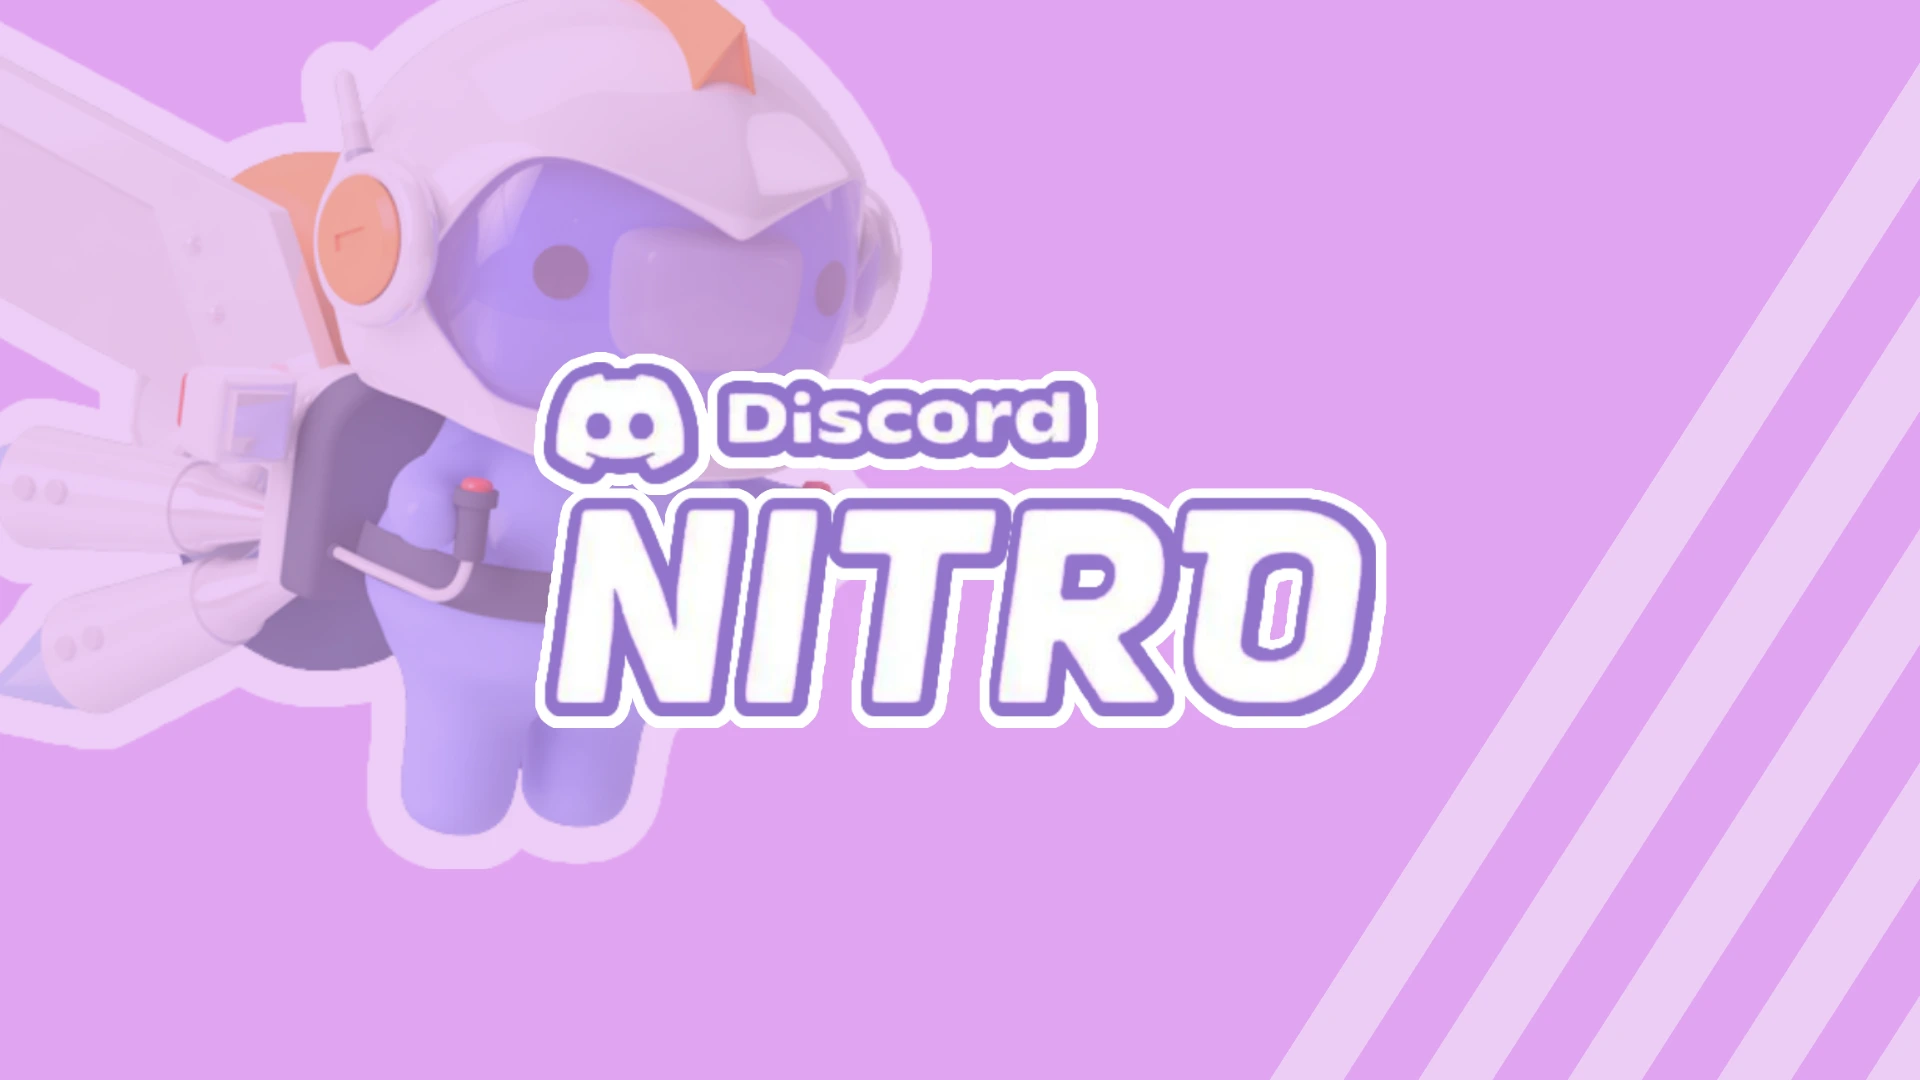 Crunchyroll X Discord NITRO promotion (1 MONTH FREE NITRO ALL YOU NEED TO  KNOW & MORE 2022) 